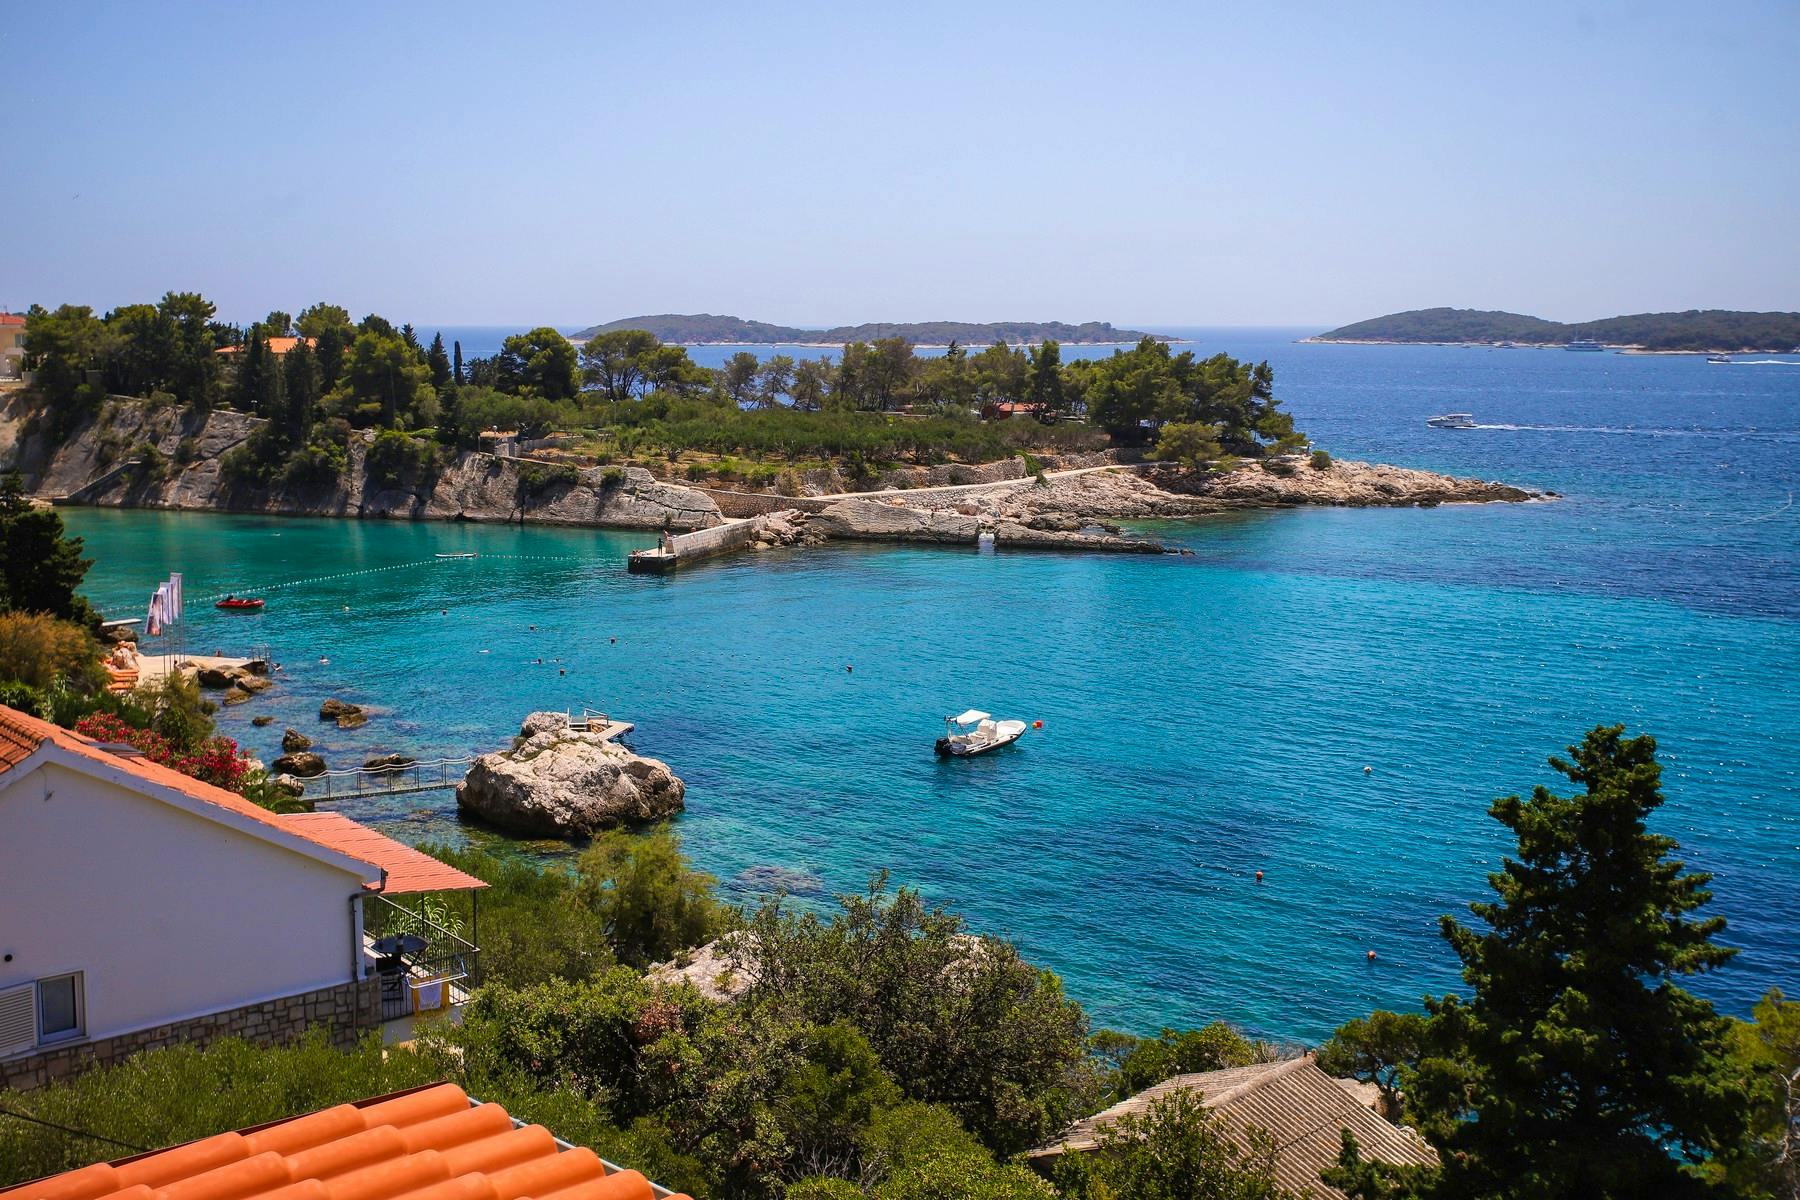 Villa for sale in the picturesque bay of Hvar